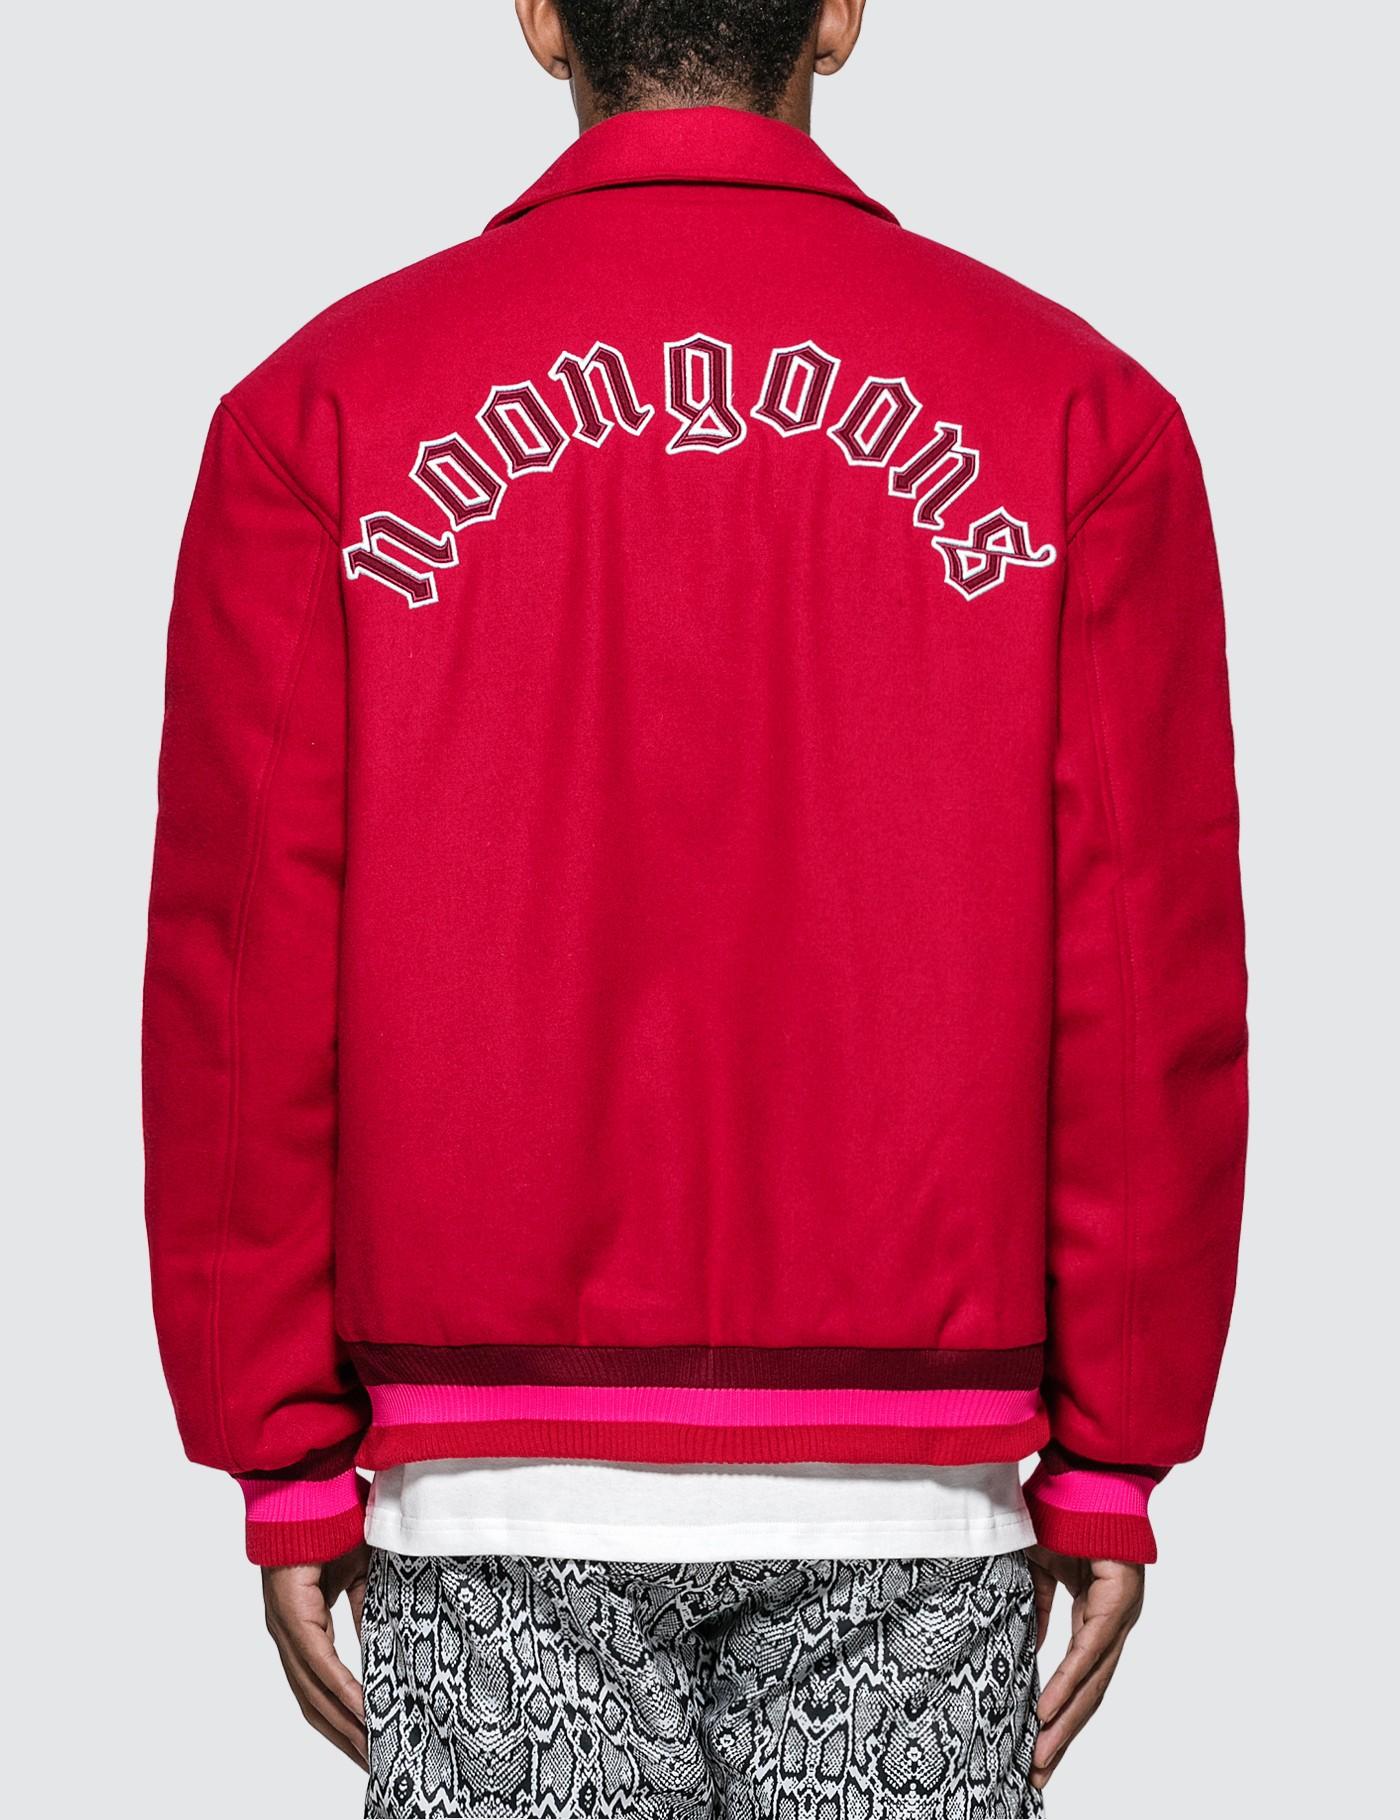 Noon Goons Oe Wool Varsity Jacket in Red for Men - Save 3% - Lyst